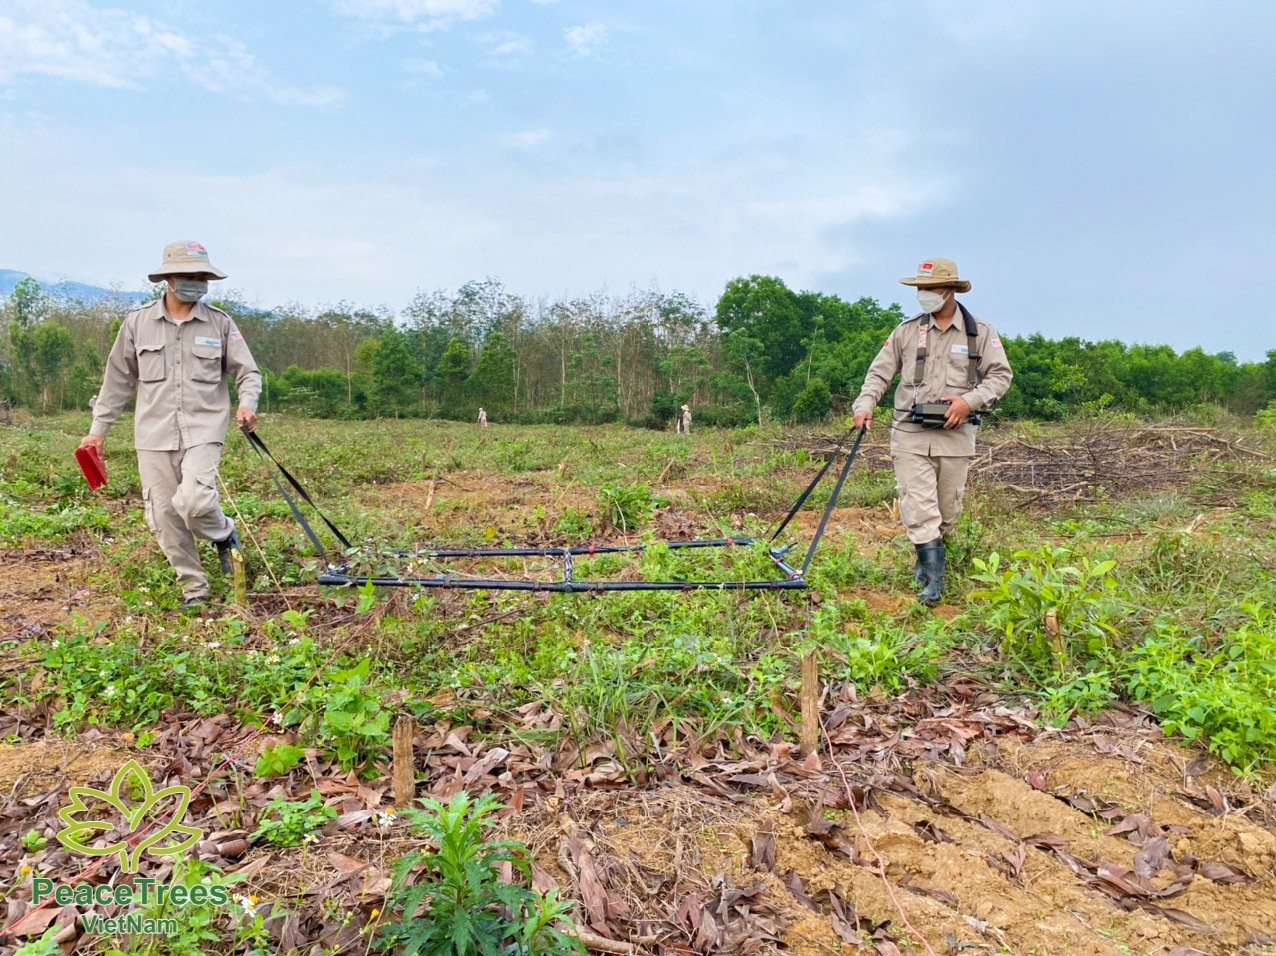 Quang Binh: PeaceTrees Clears 1,5 million m2 of Land in Phase I